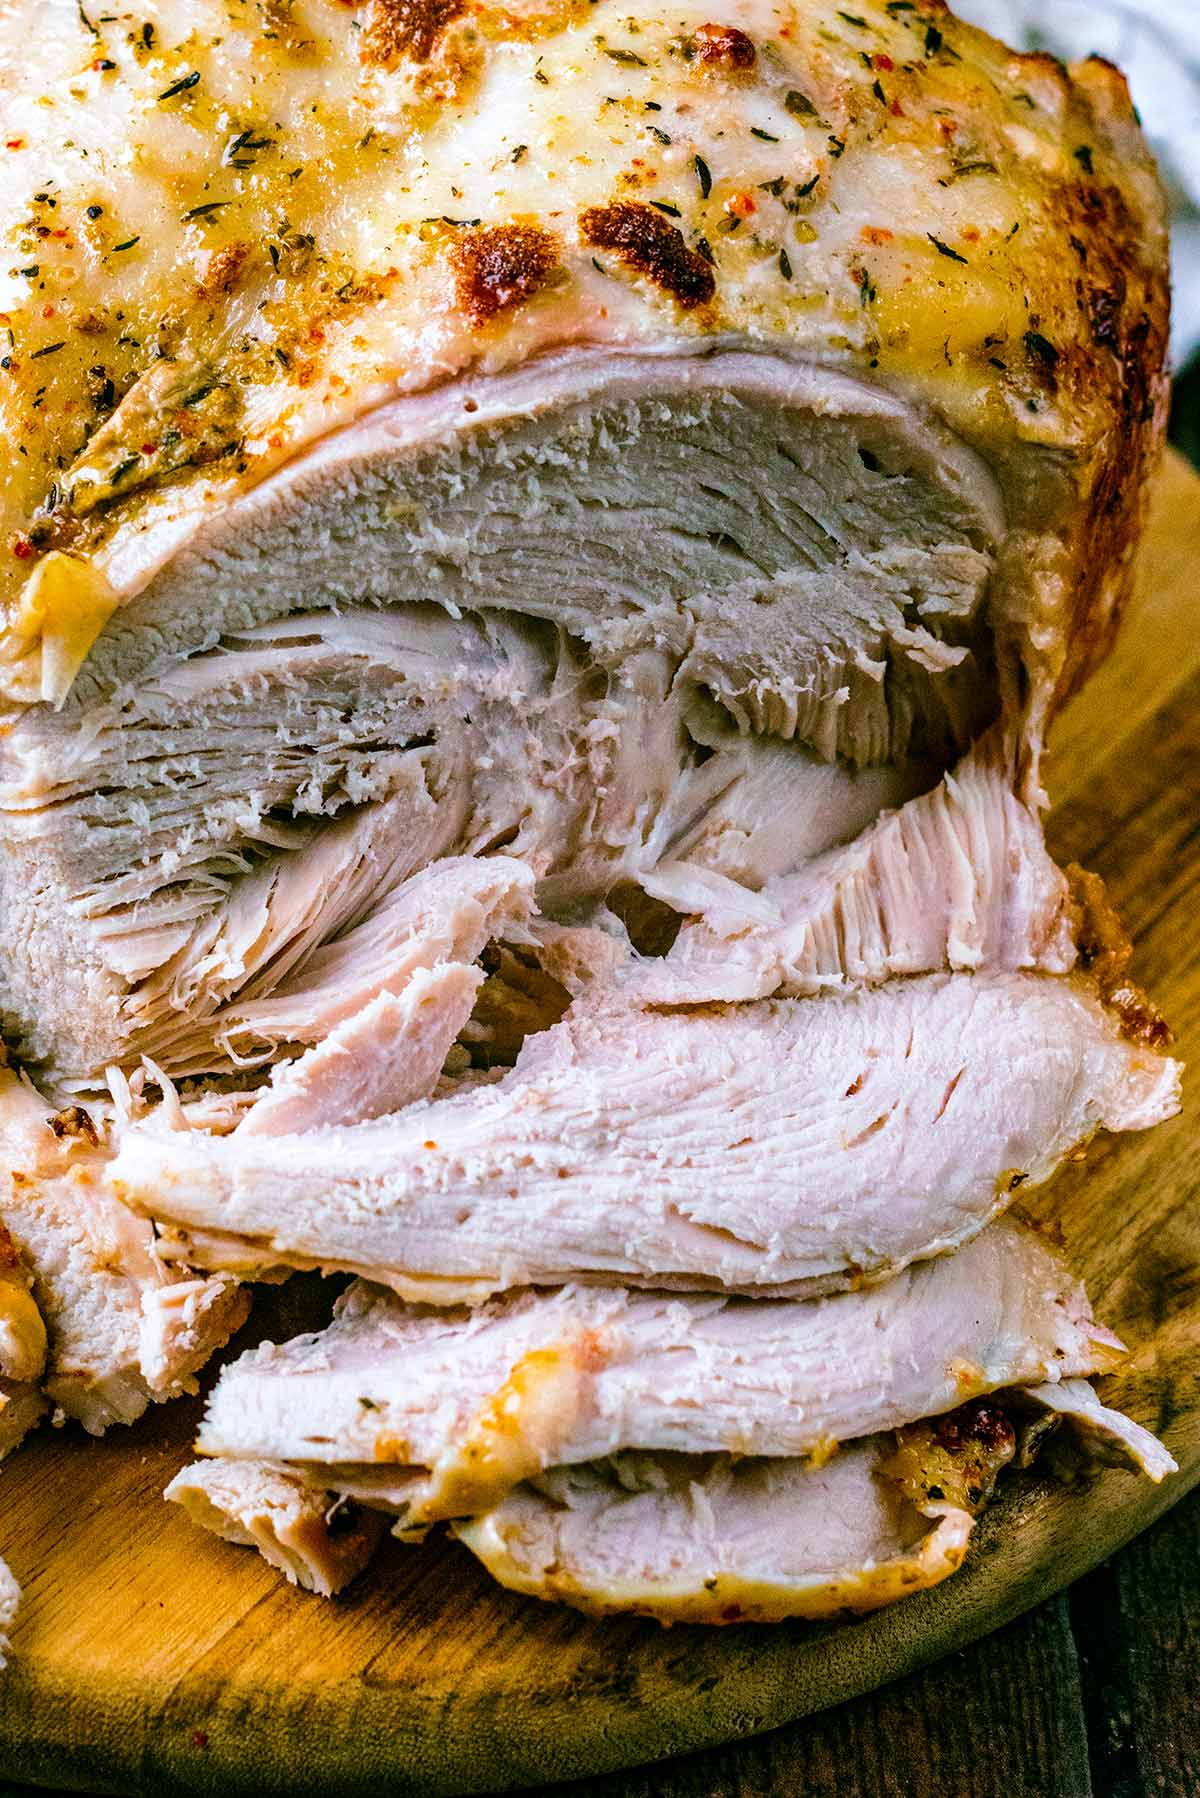 Slices of turkey falling away from the breast.